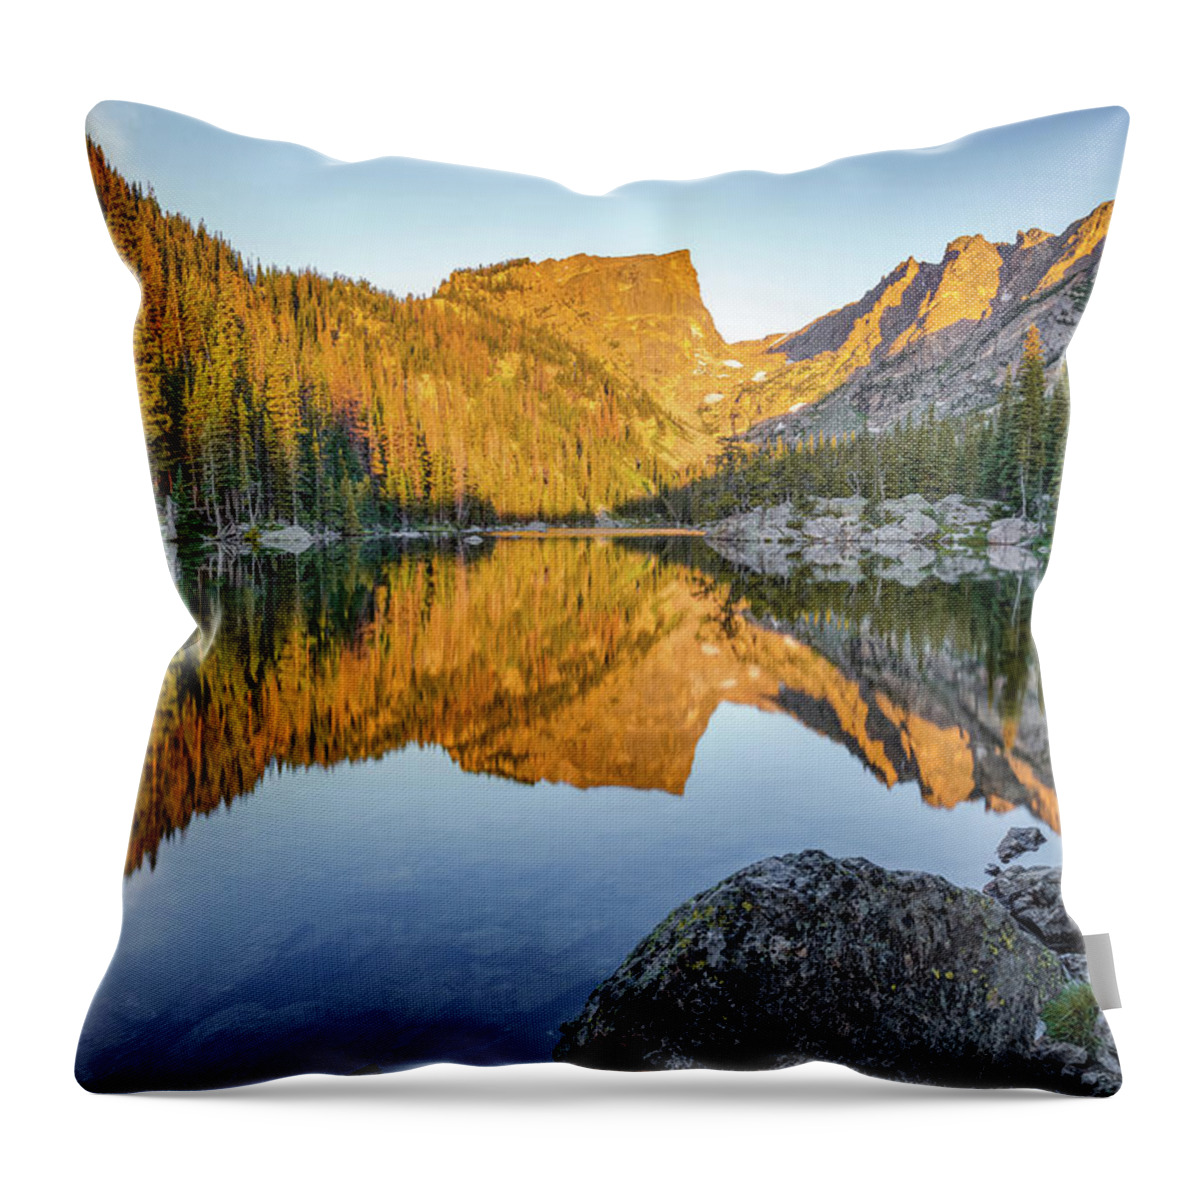 America Throw Pillow featuring the photograph Dream Lake Mountain Landscape Reflections by Gregory Ballos